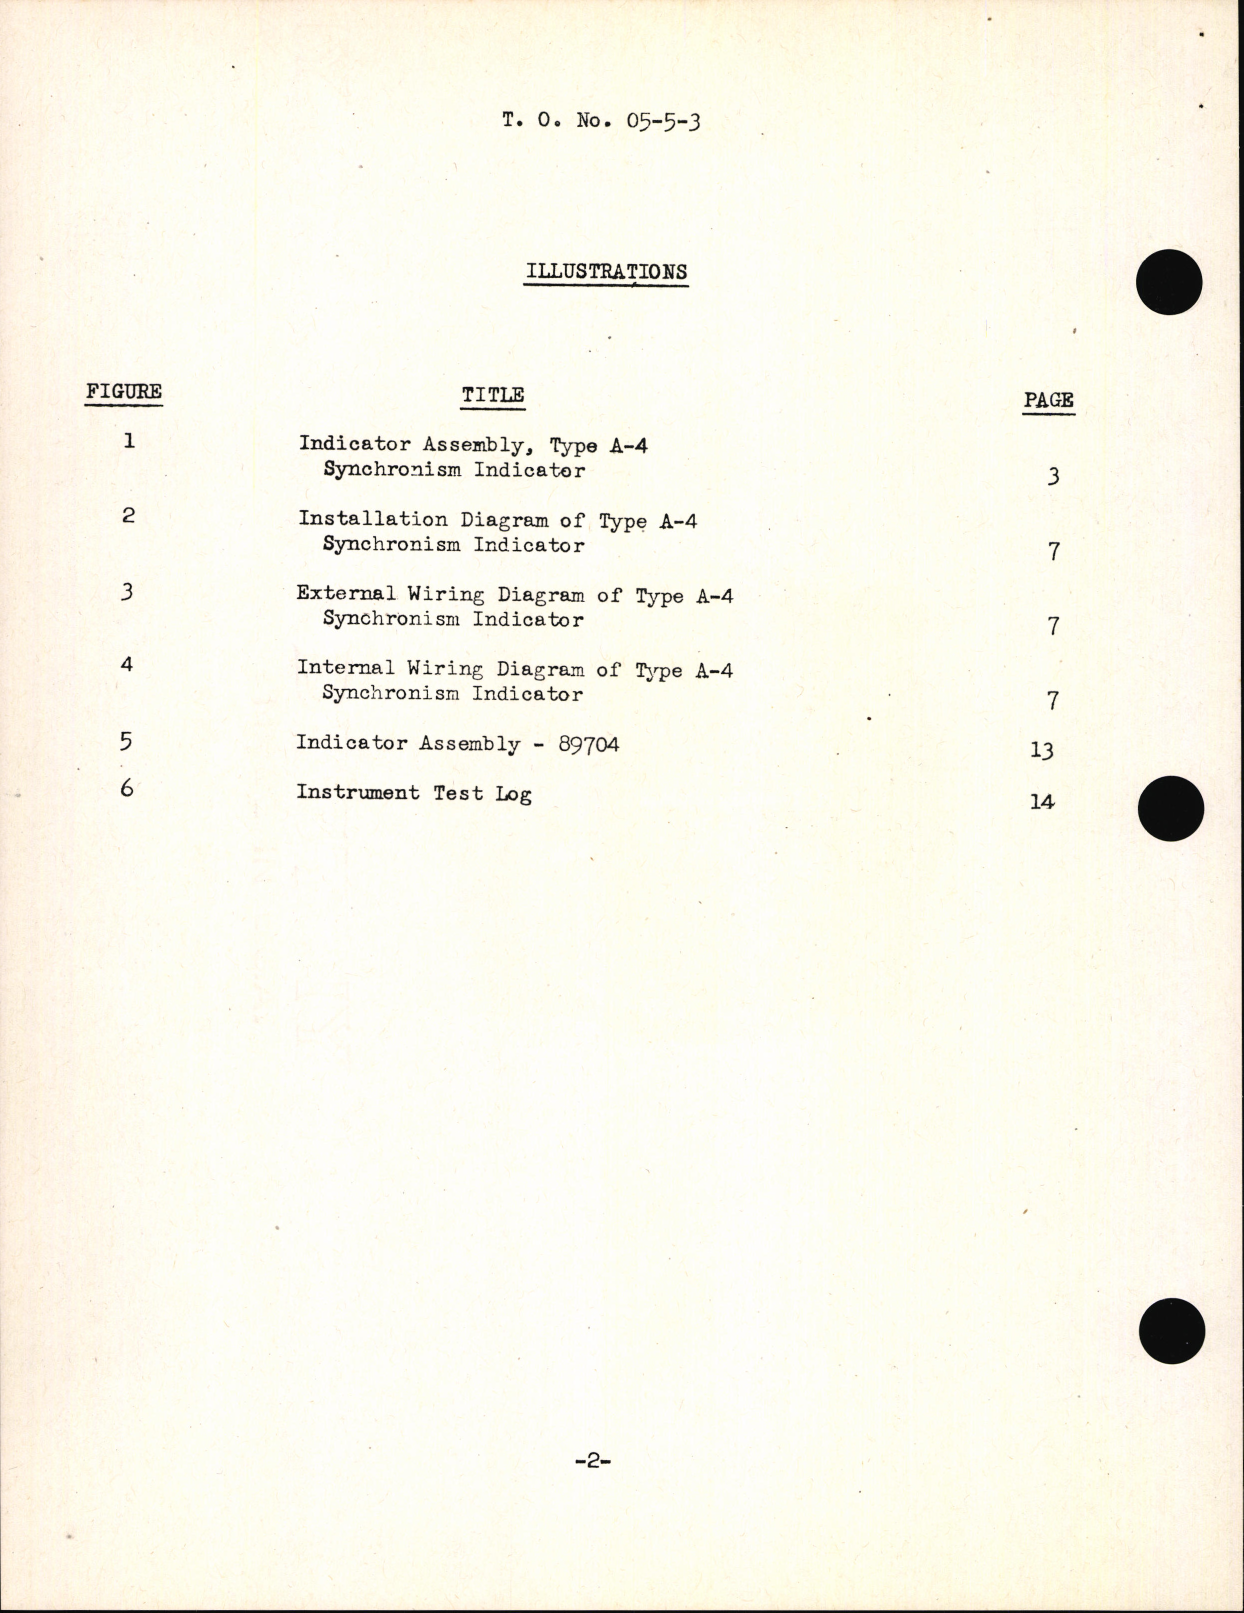 Sample page 6 from AirCorps Library document: Handbook of Instructions with Parts Catalog for Type A-4 Synchronism Indicator